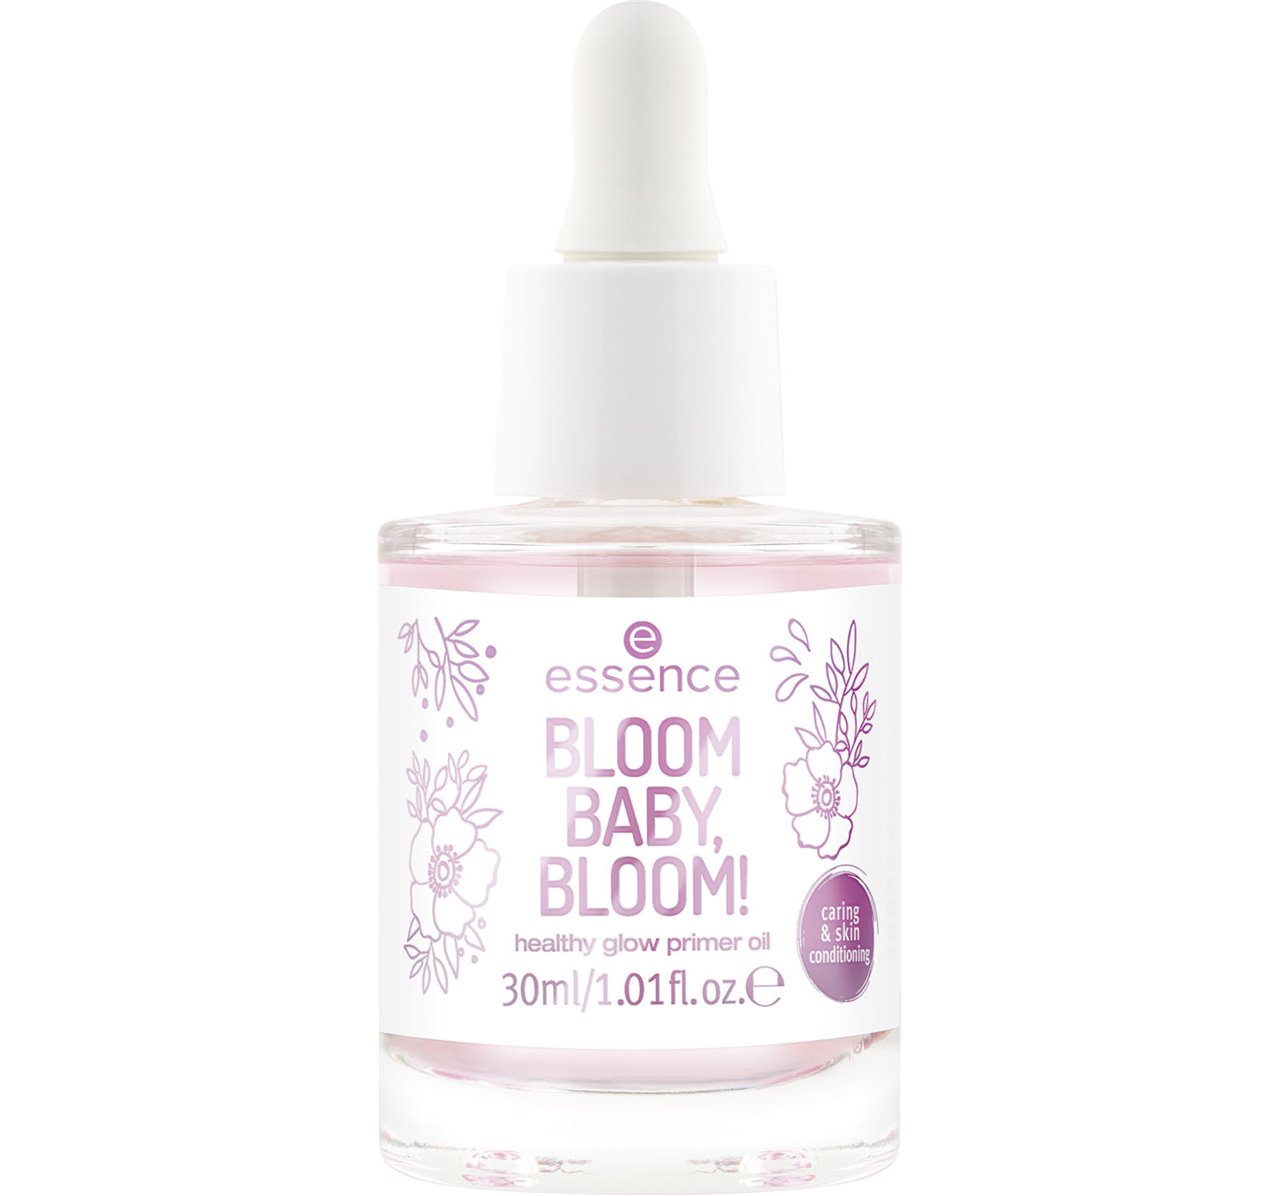 bloom baby products